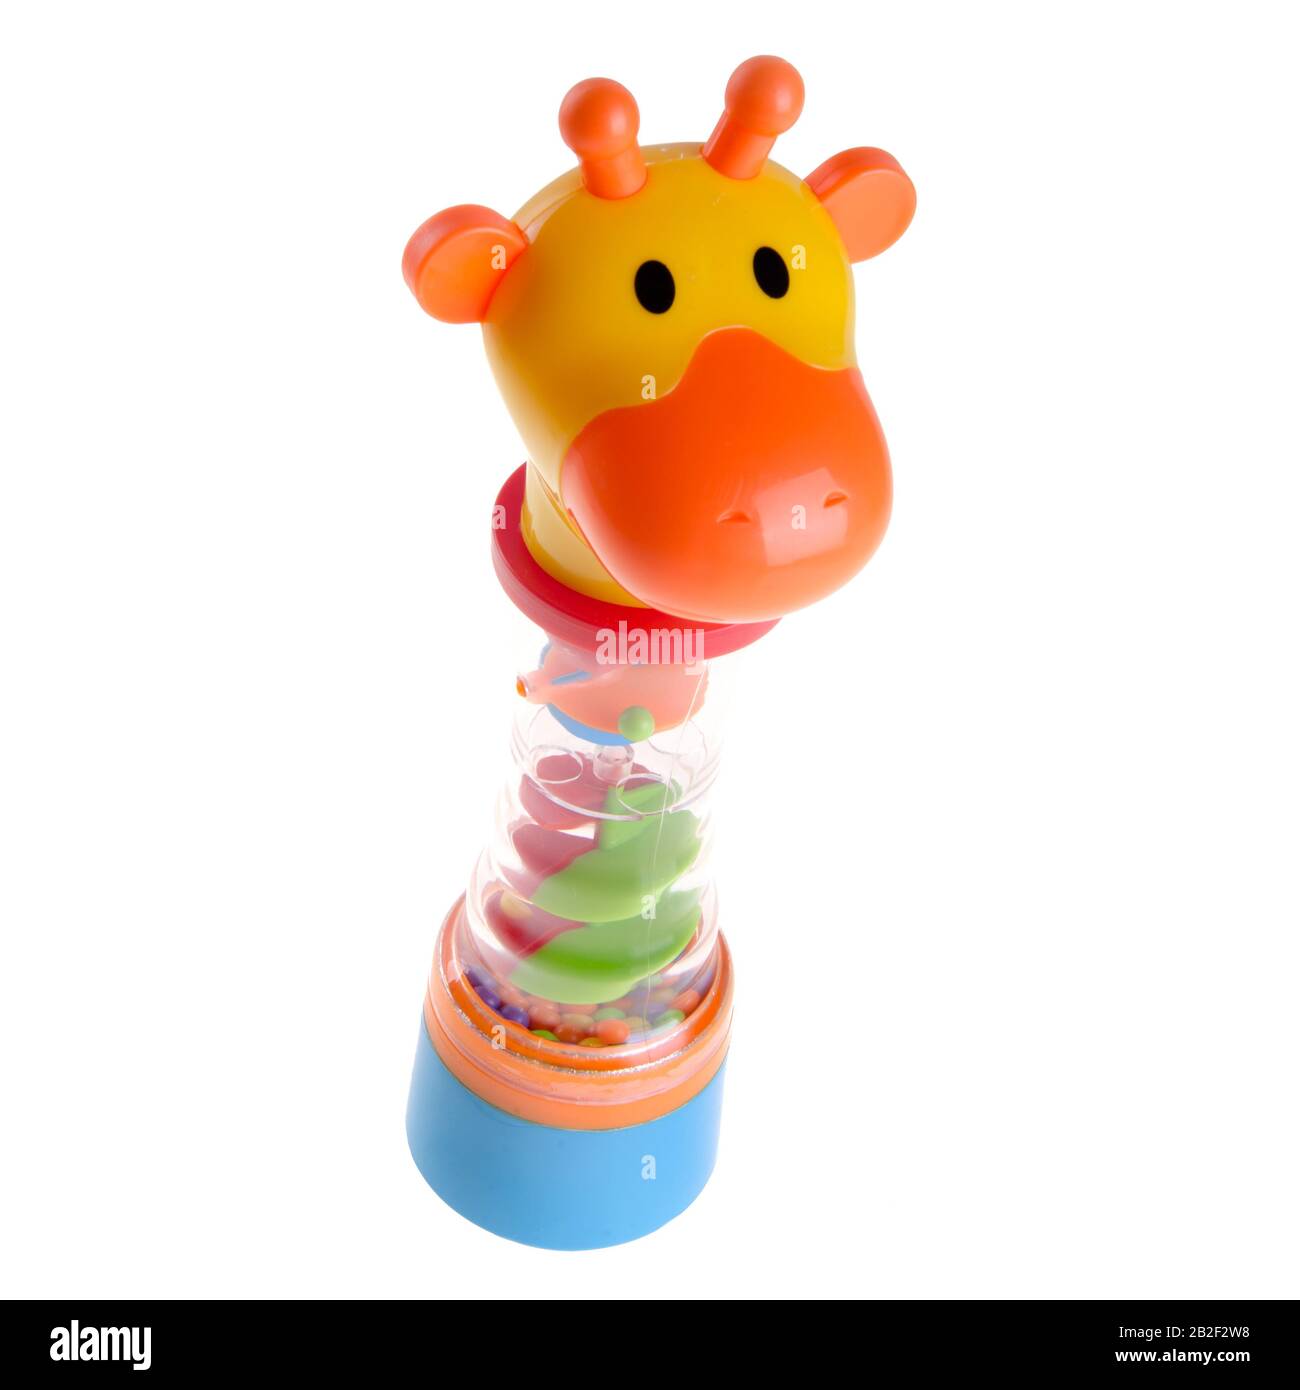 Toy or baby giraffe toys on the background new Stock Photo